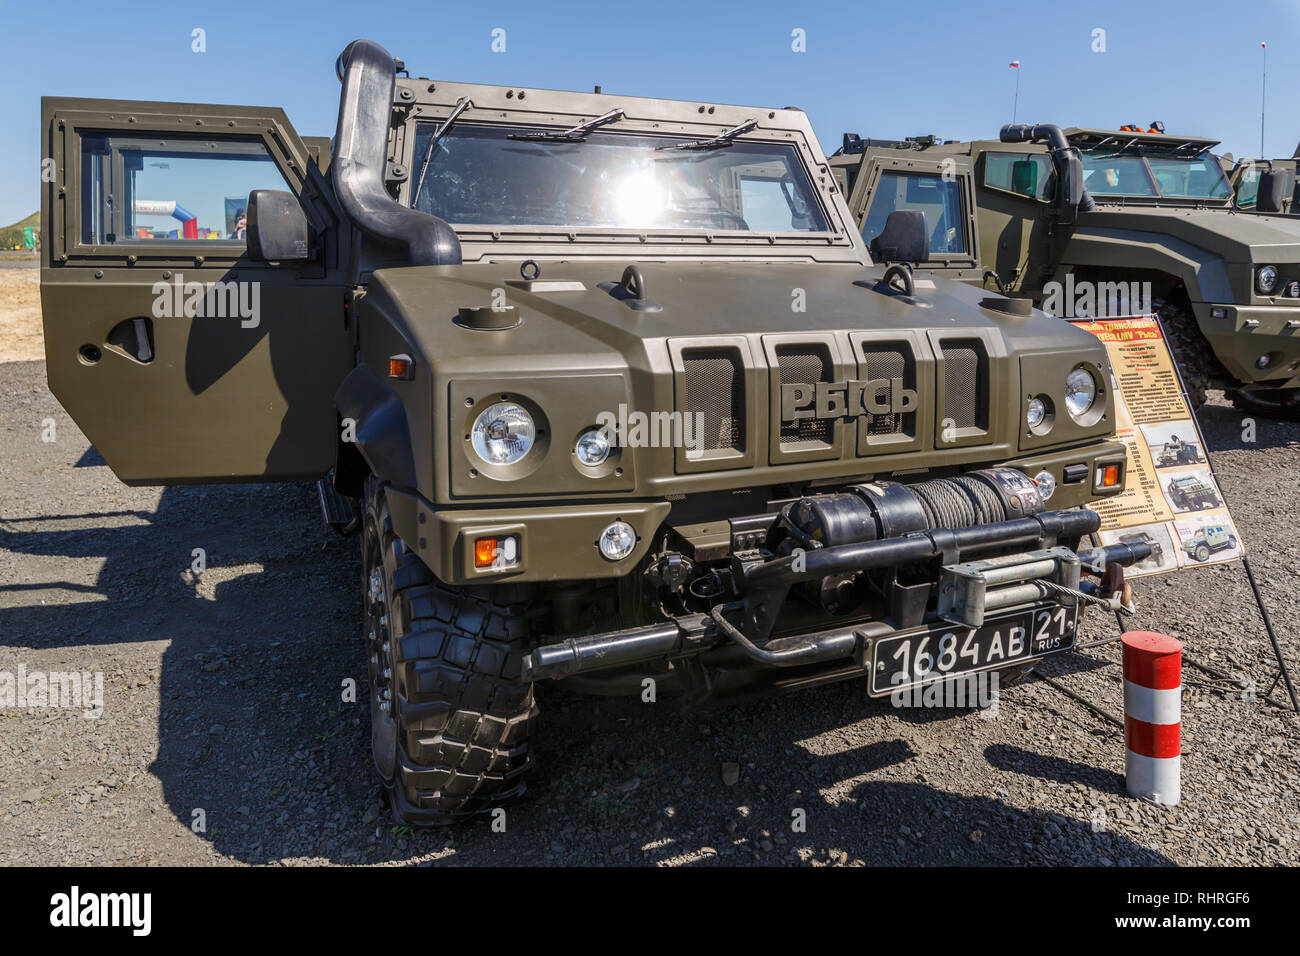 International military technical forum ARMY-2018. Special multi-purposes armored vehicle Rys, Iveco LMV Stock Photo